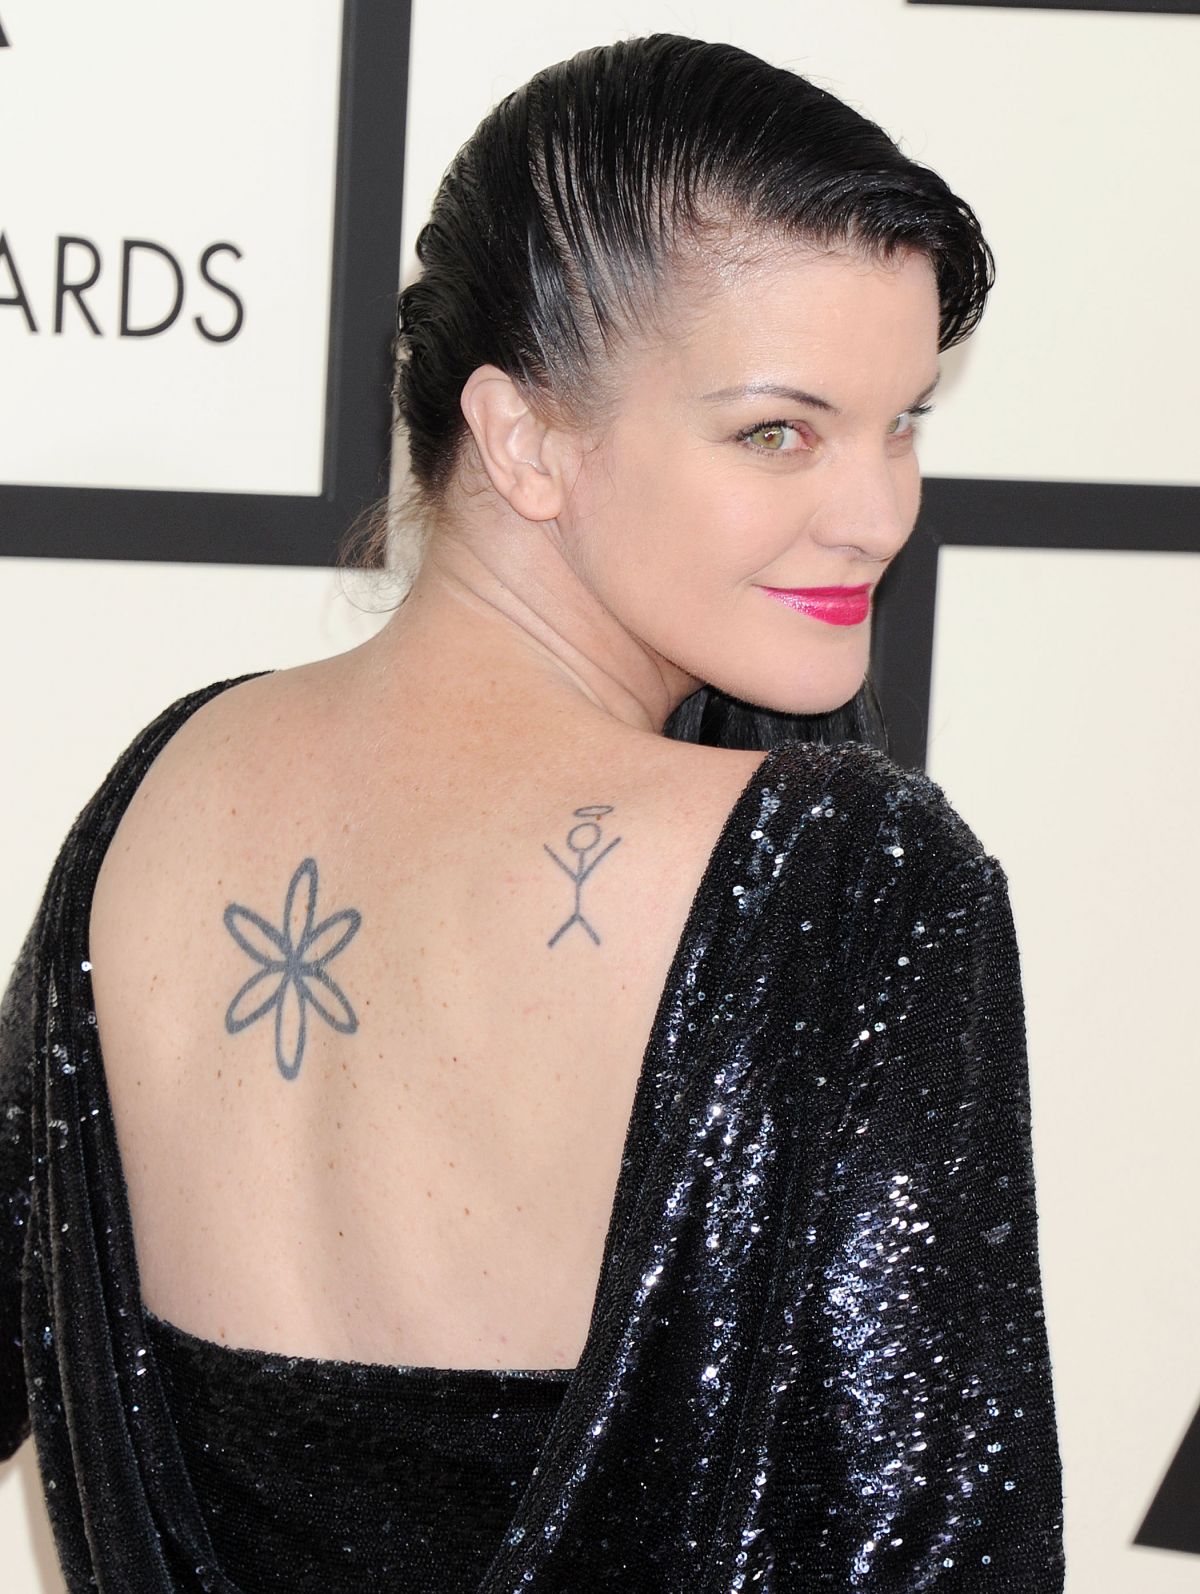 PAULEY PERRETTE at 2015 Grammy Awards in Los Angeles.